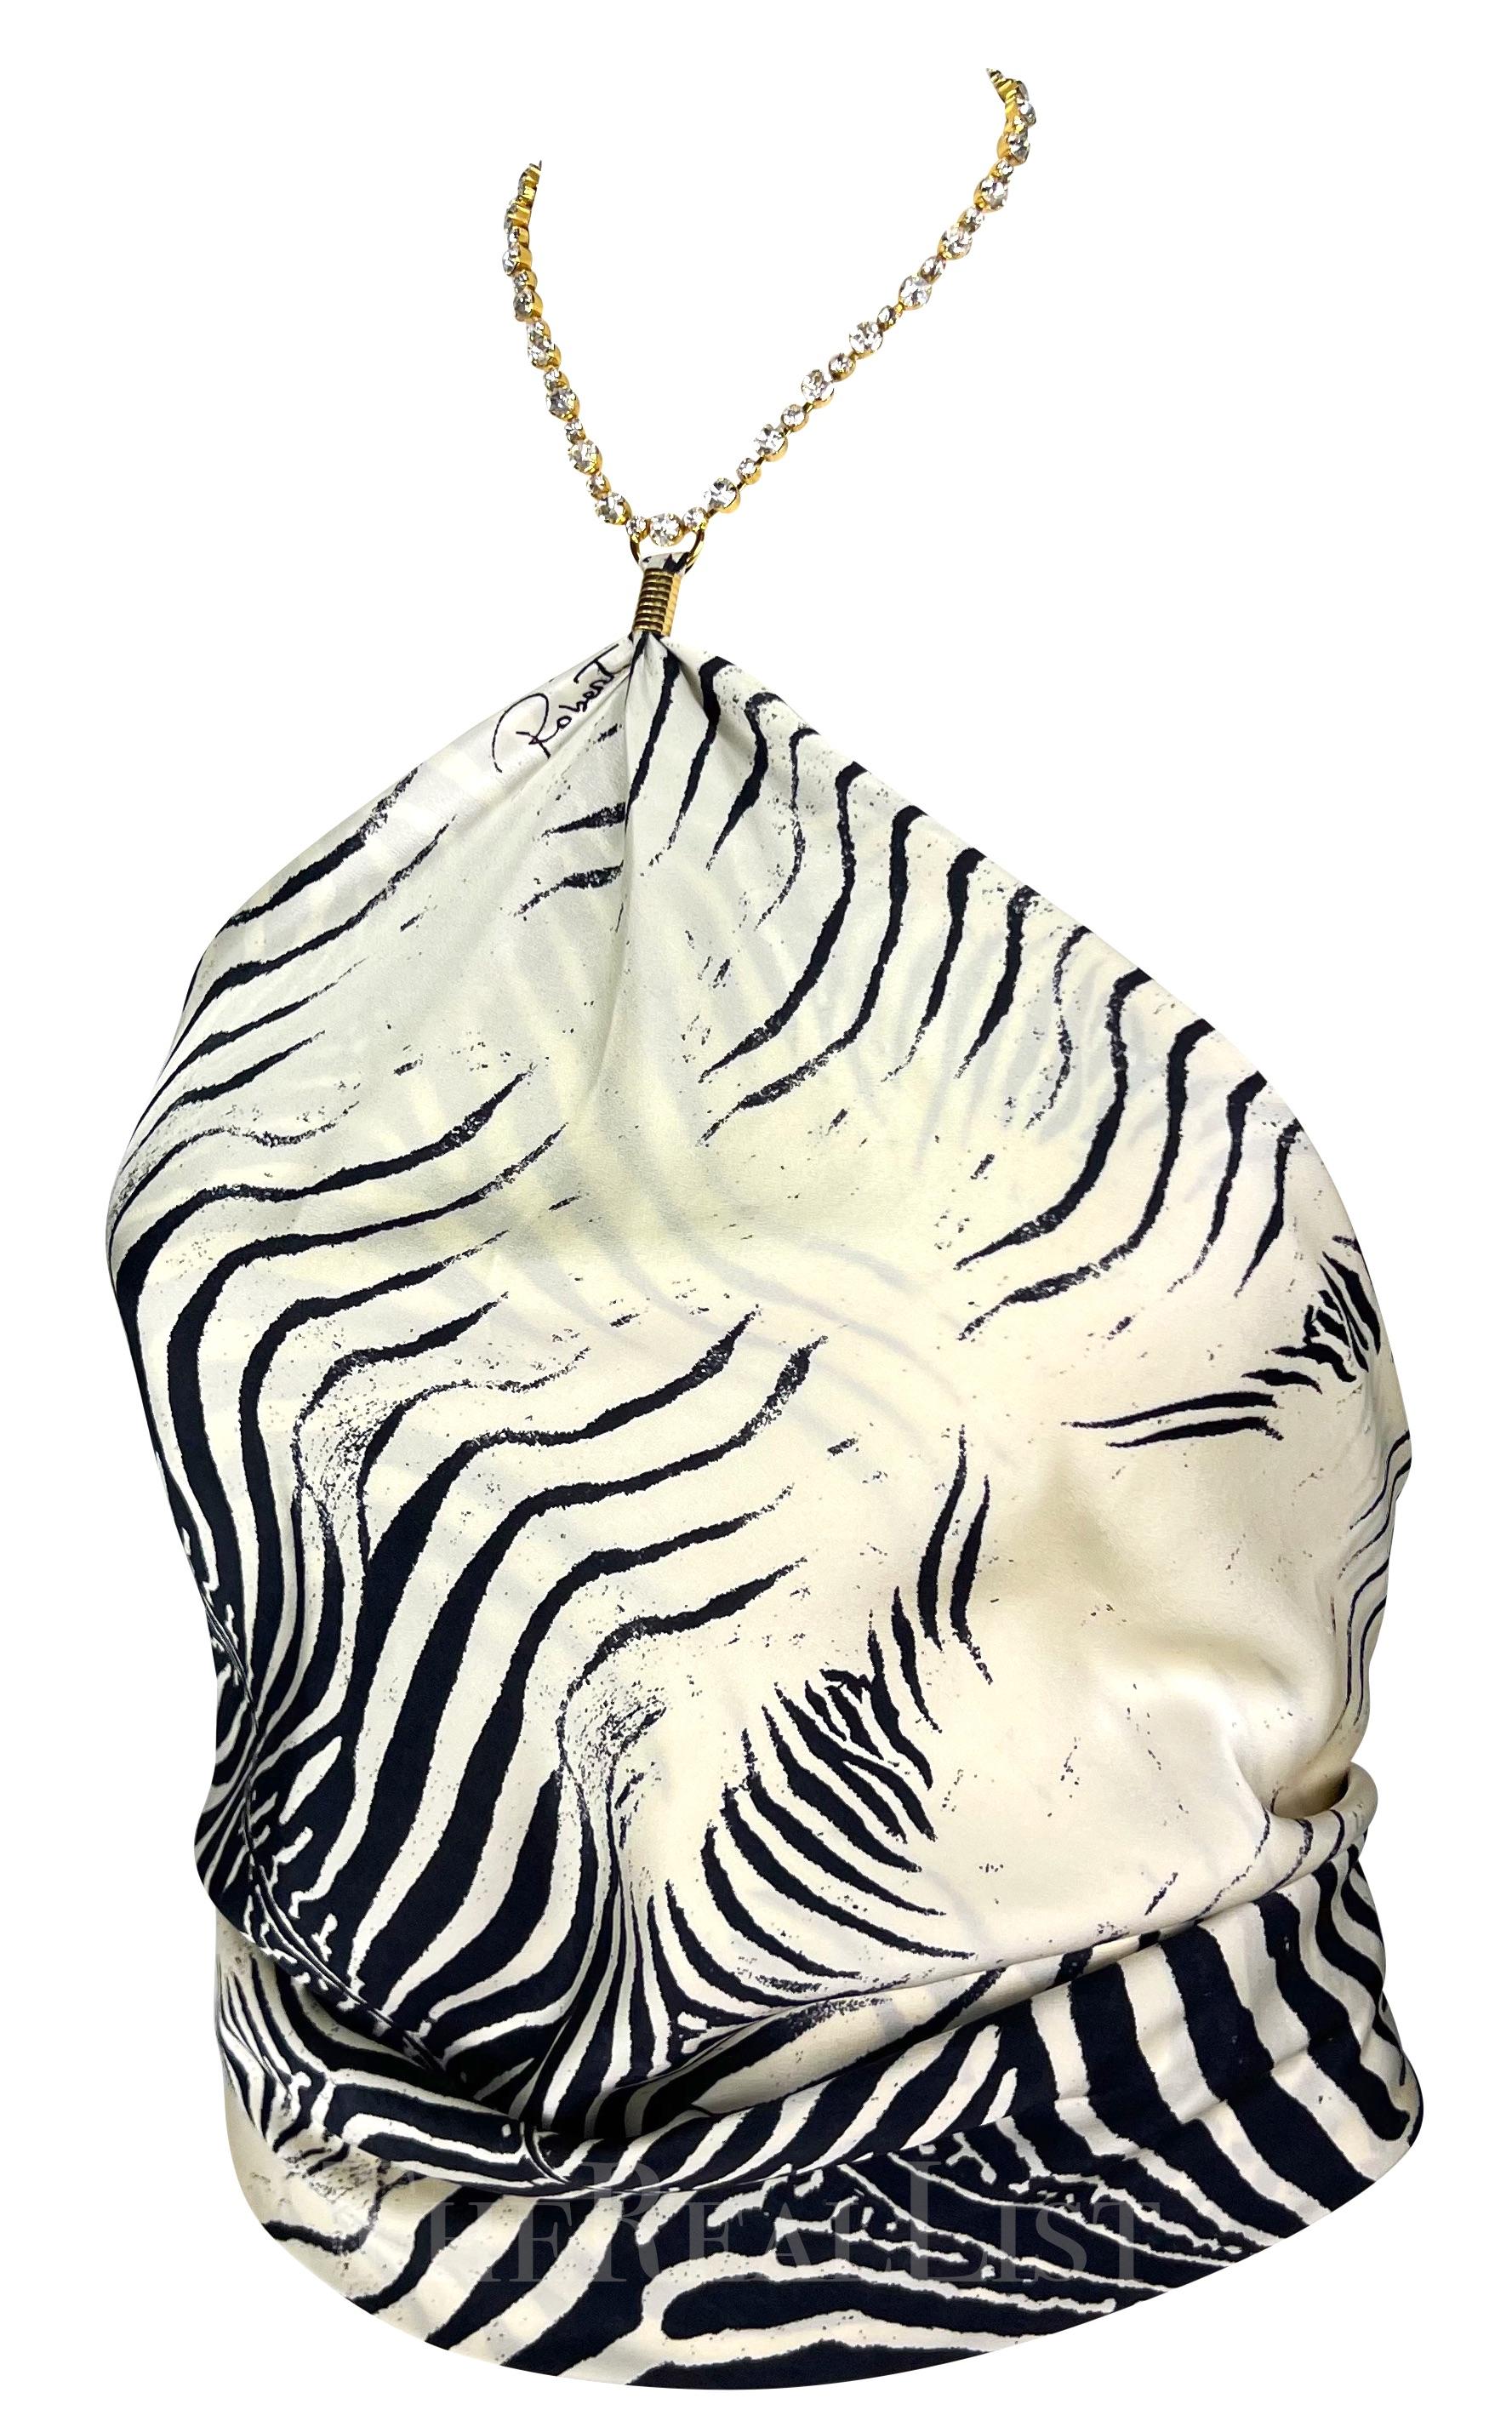 S/S 2000 Roberto Cavalli Rhinestone Zebra Print Triangle Silk Scarf Crop Top In Excellent Condition For Sale In West Hollywood, CA